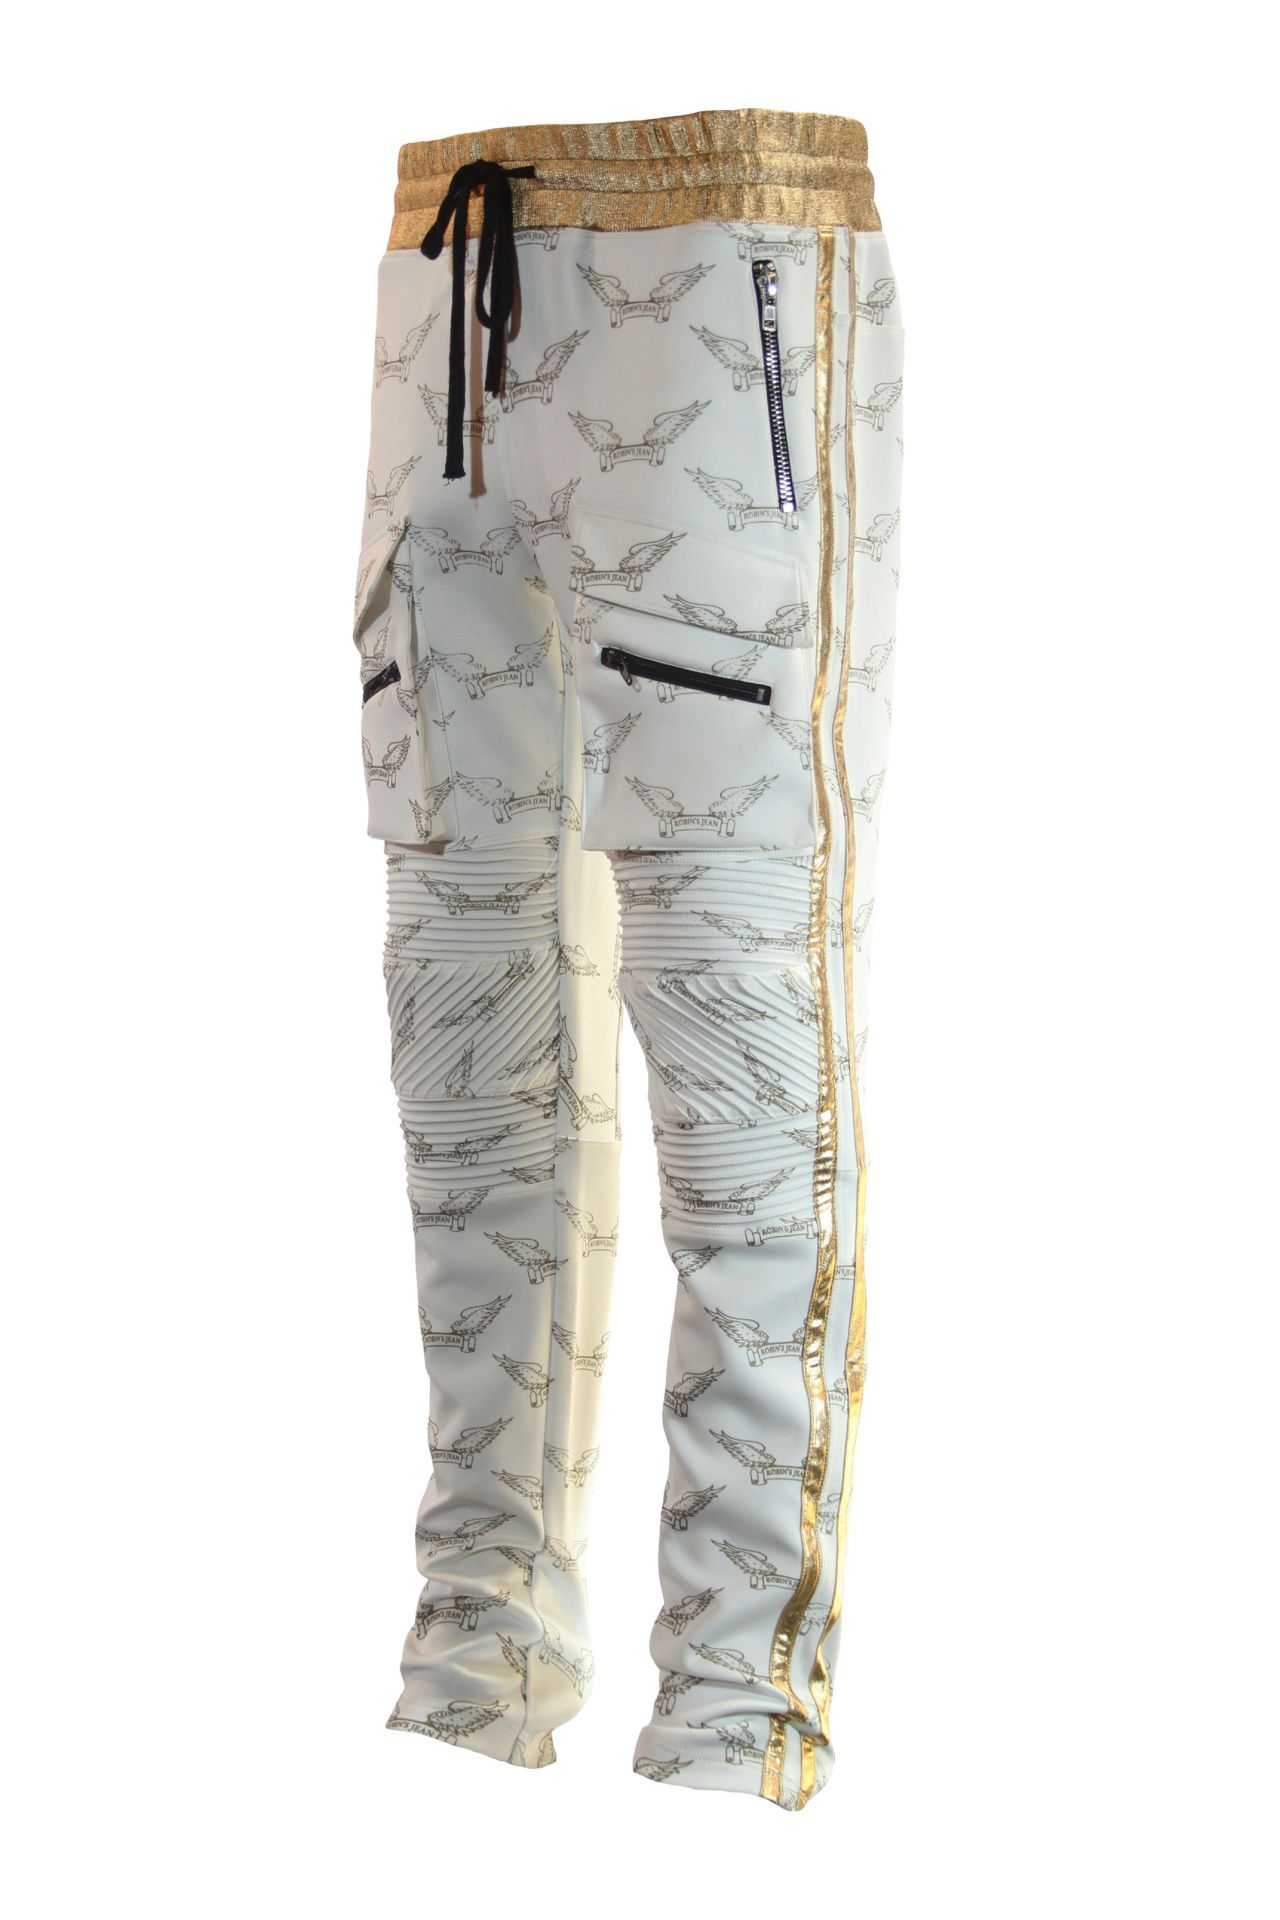 ROBIN'S MONOGRAM JOGGER IN WHITE AND GOLD